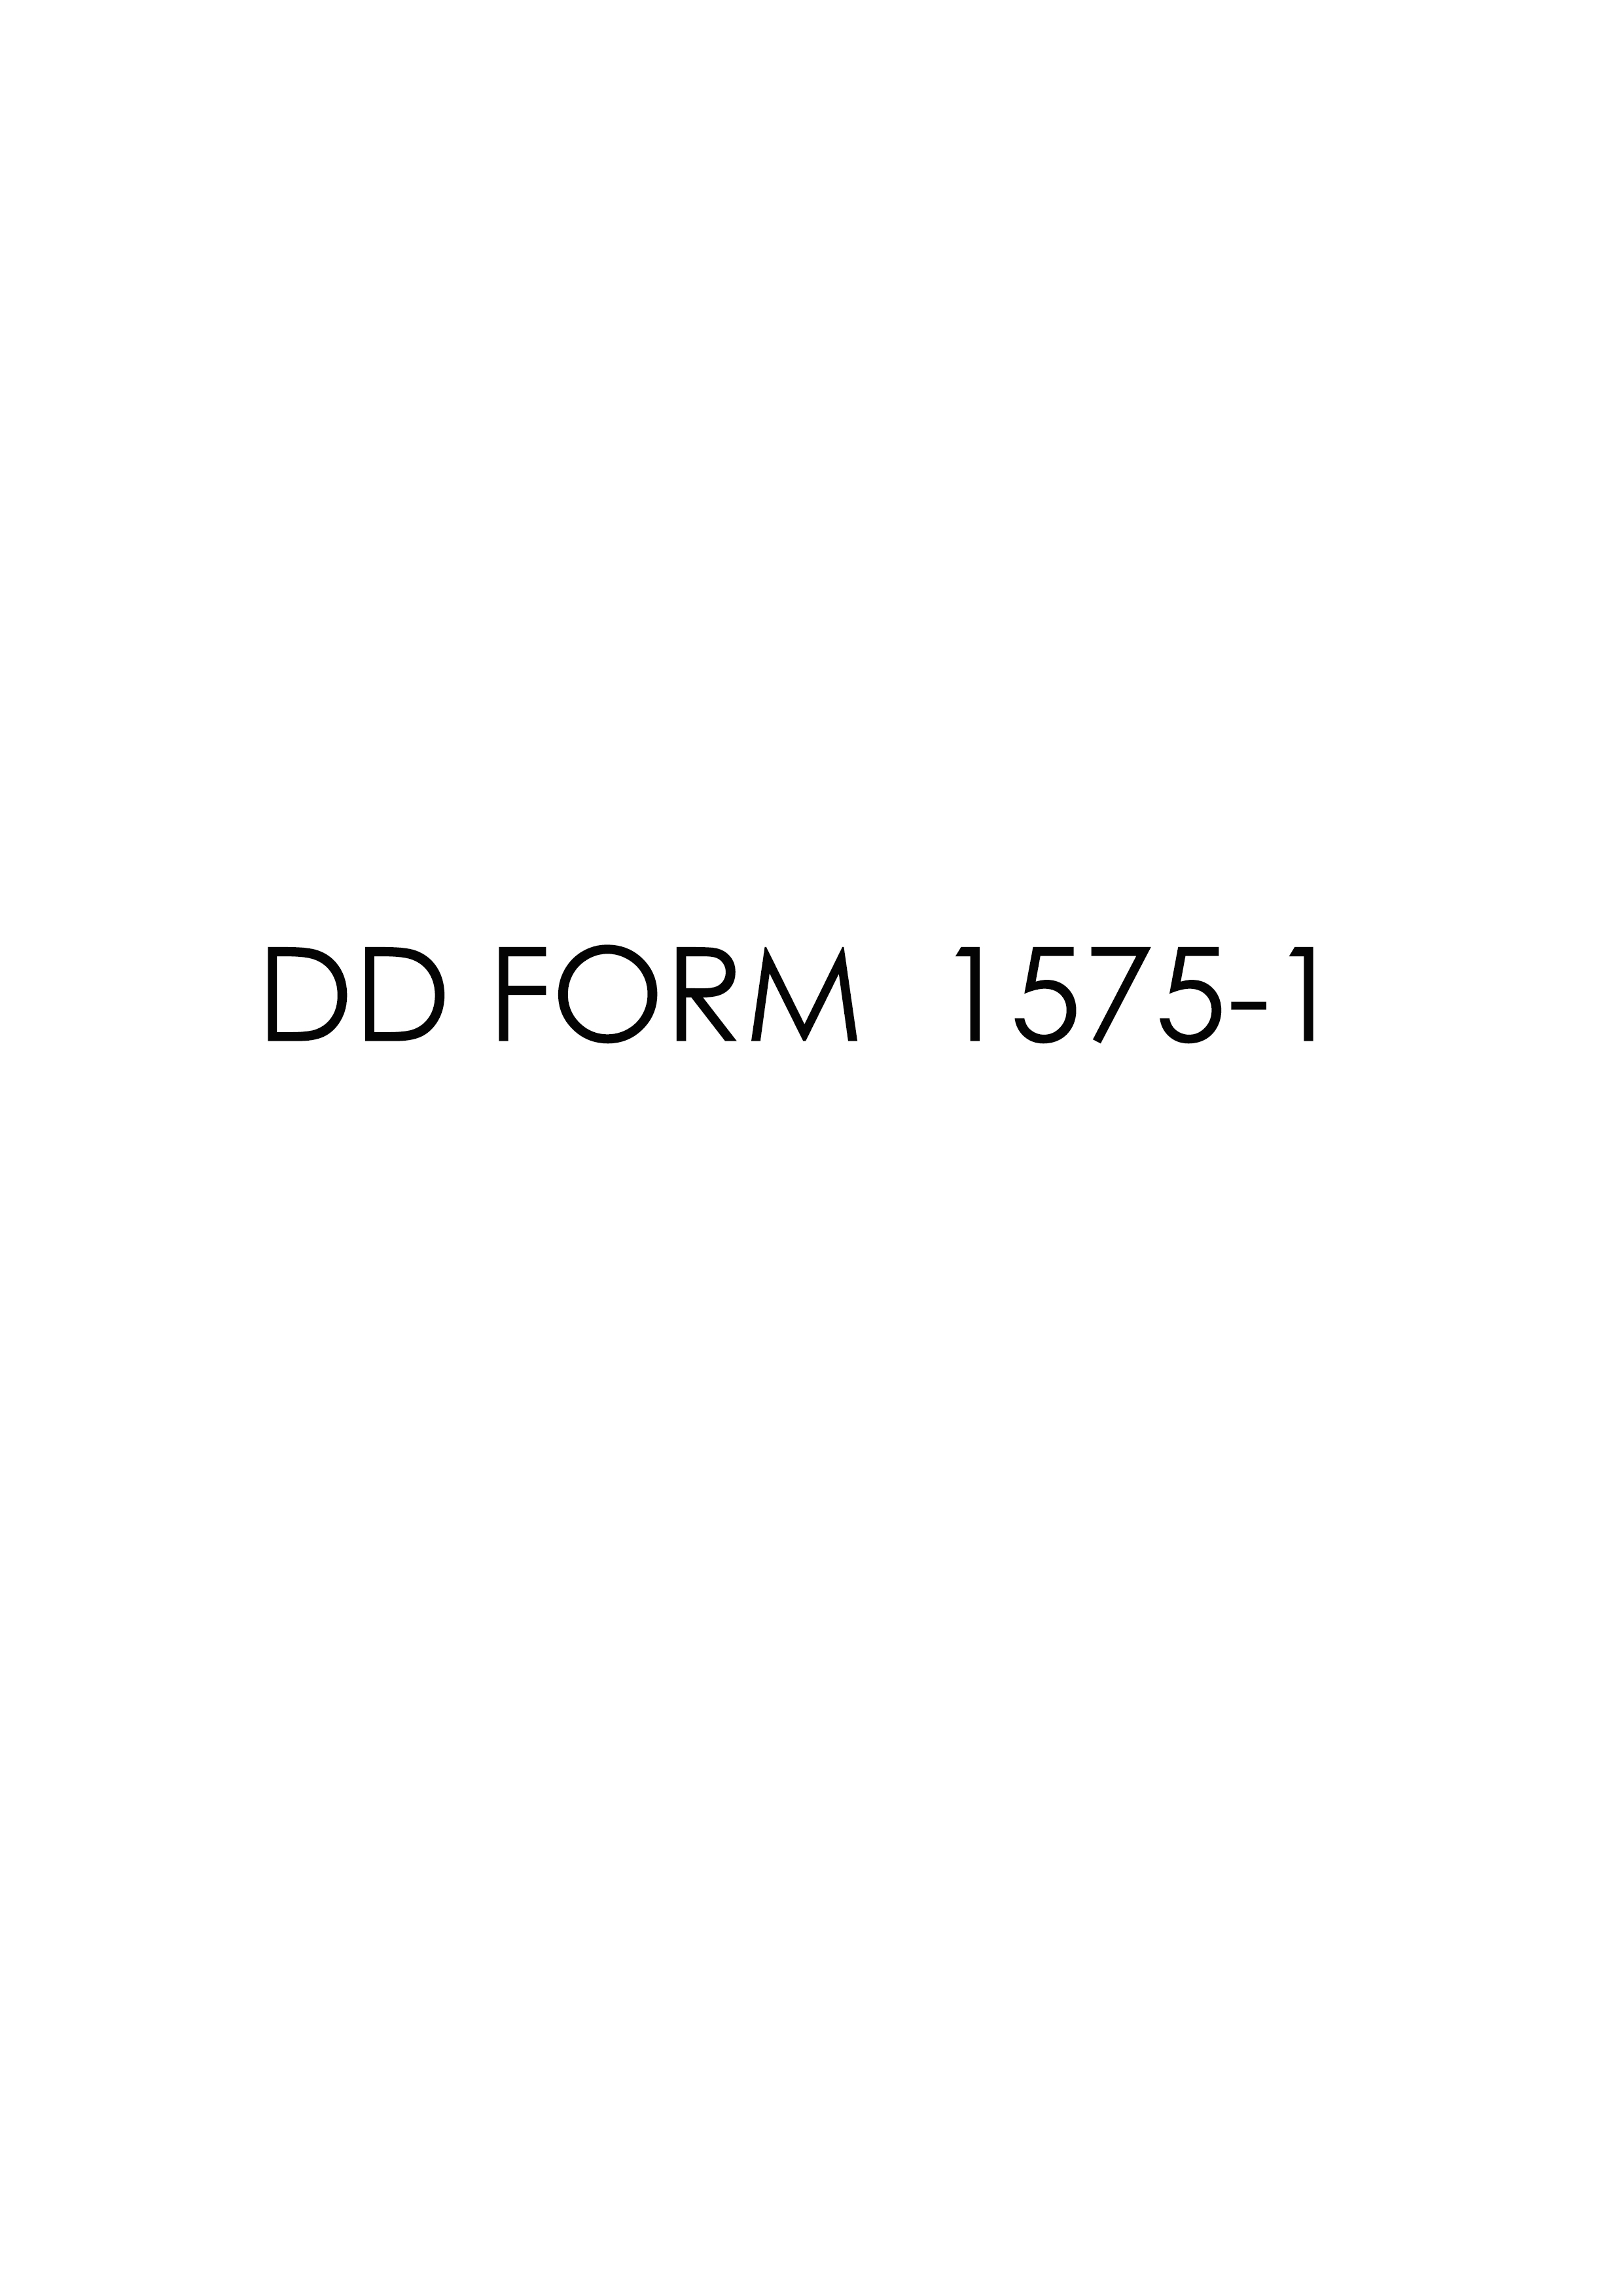 Download Fillable dd Form 1575-1